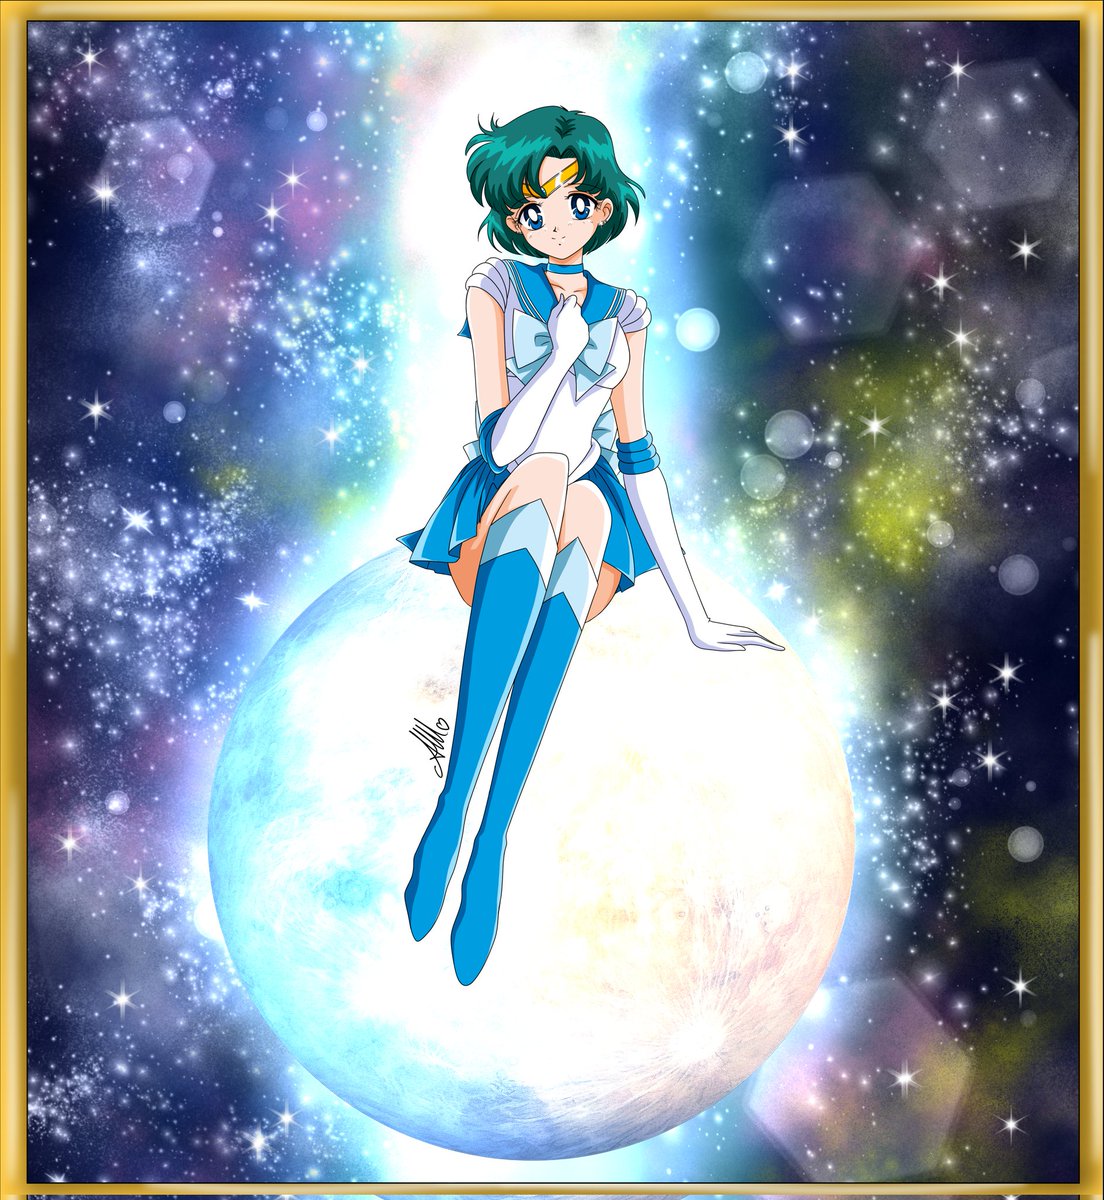 🌊 #sailormercury is one of my favorites. with this one only two missing. I hope you enjoy 🔵
#ikukoitoh #sailormoon #naokotakeuchi #supersailormoon  #prettyguardiansailormoon  #sailor #sailormooneternal #sailormoon90s  #sailormoon30thanniversary #美少女戦士セーラームーンcosmos